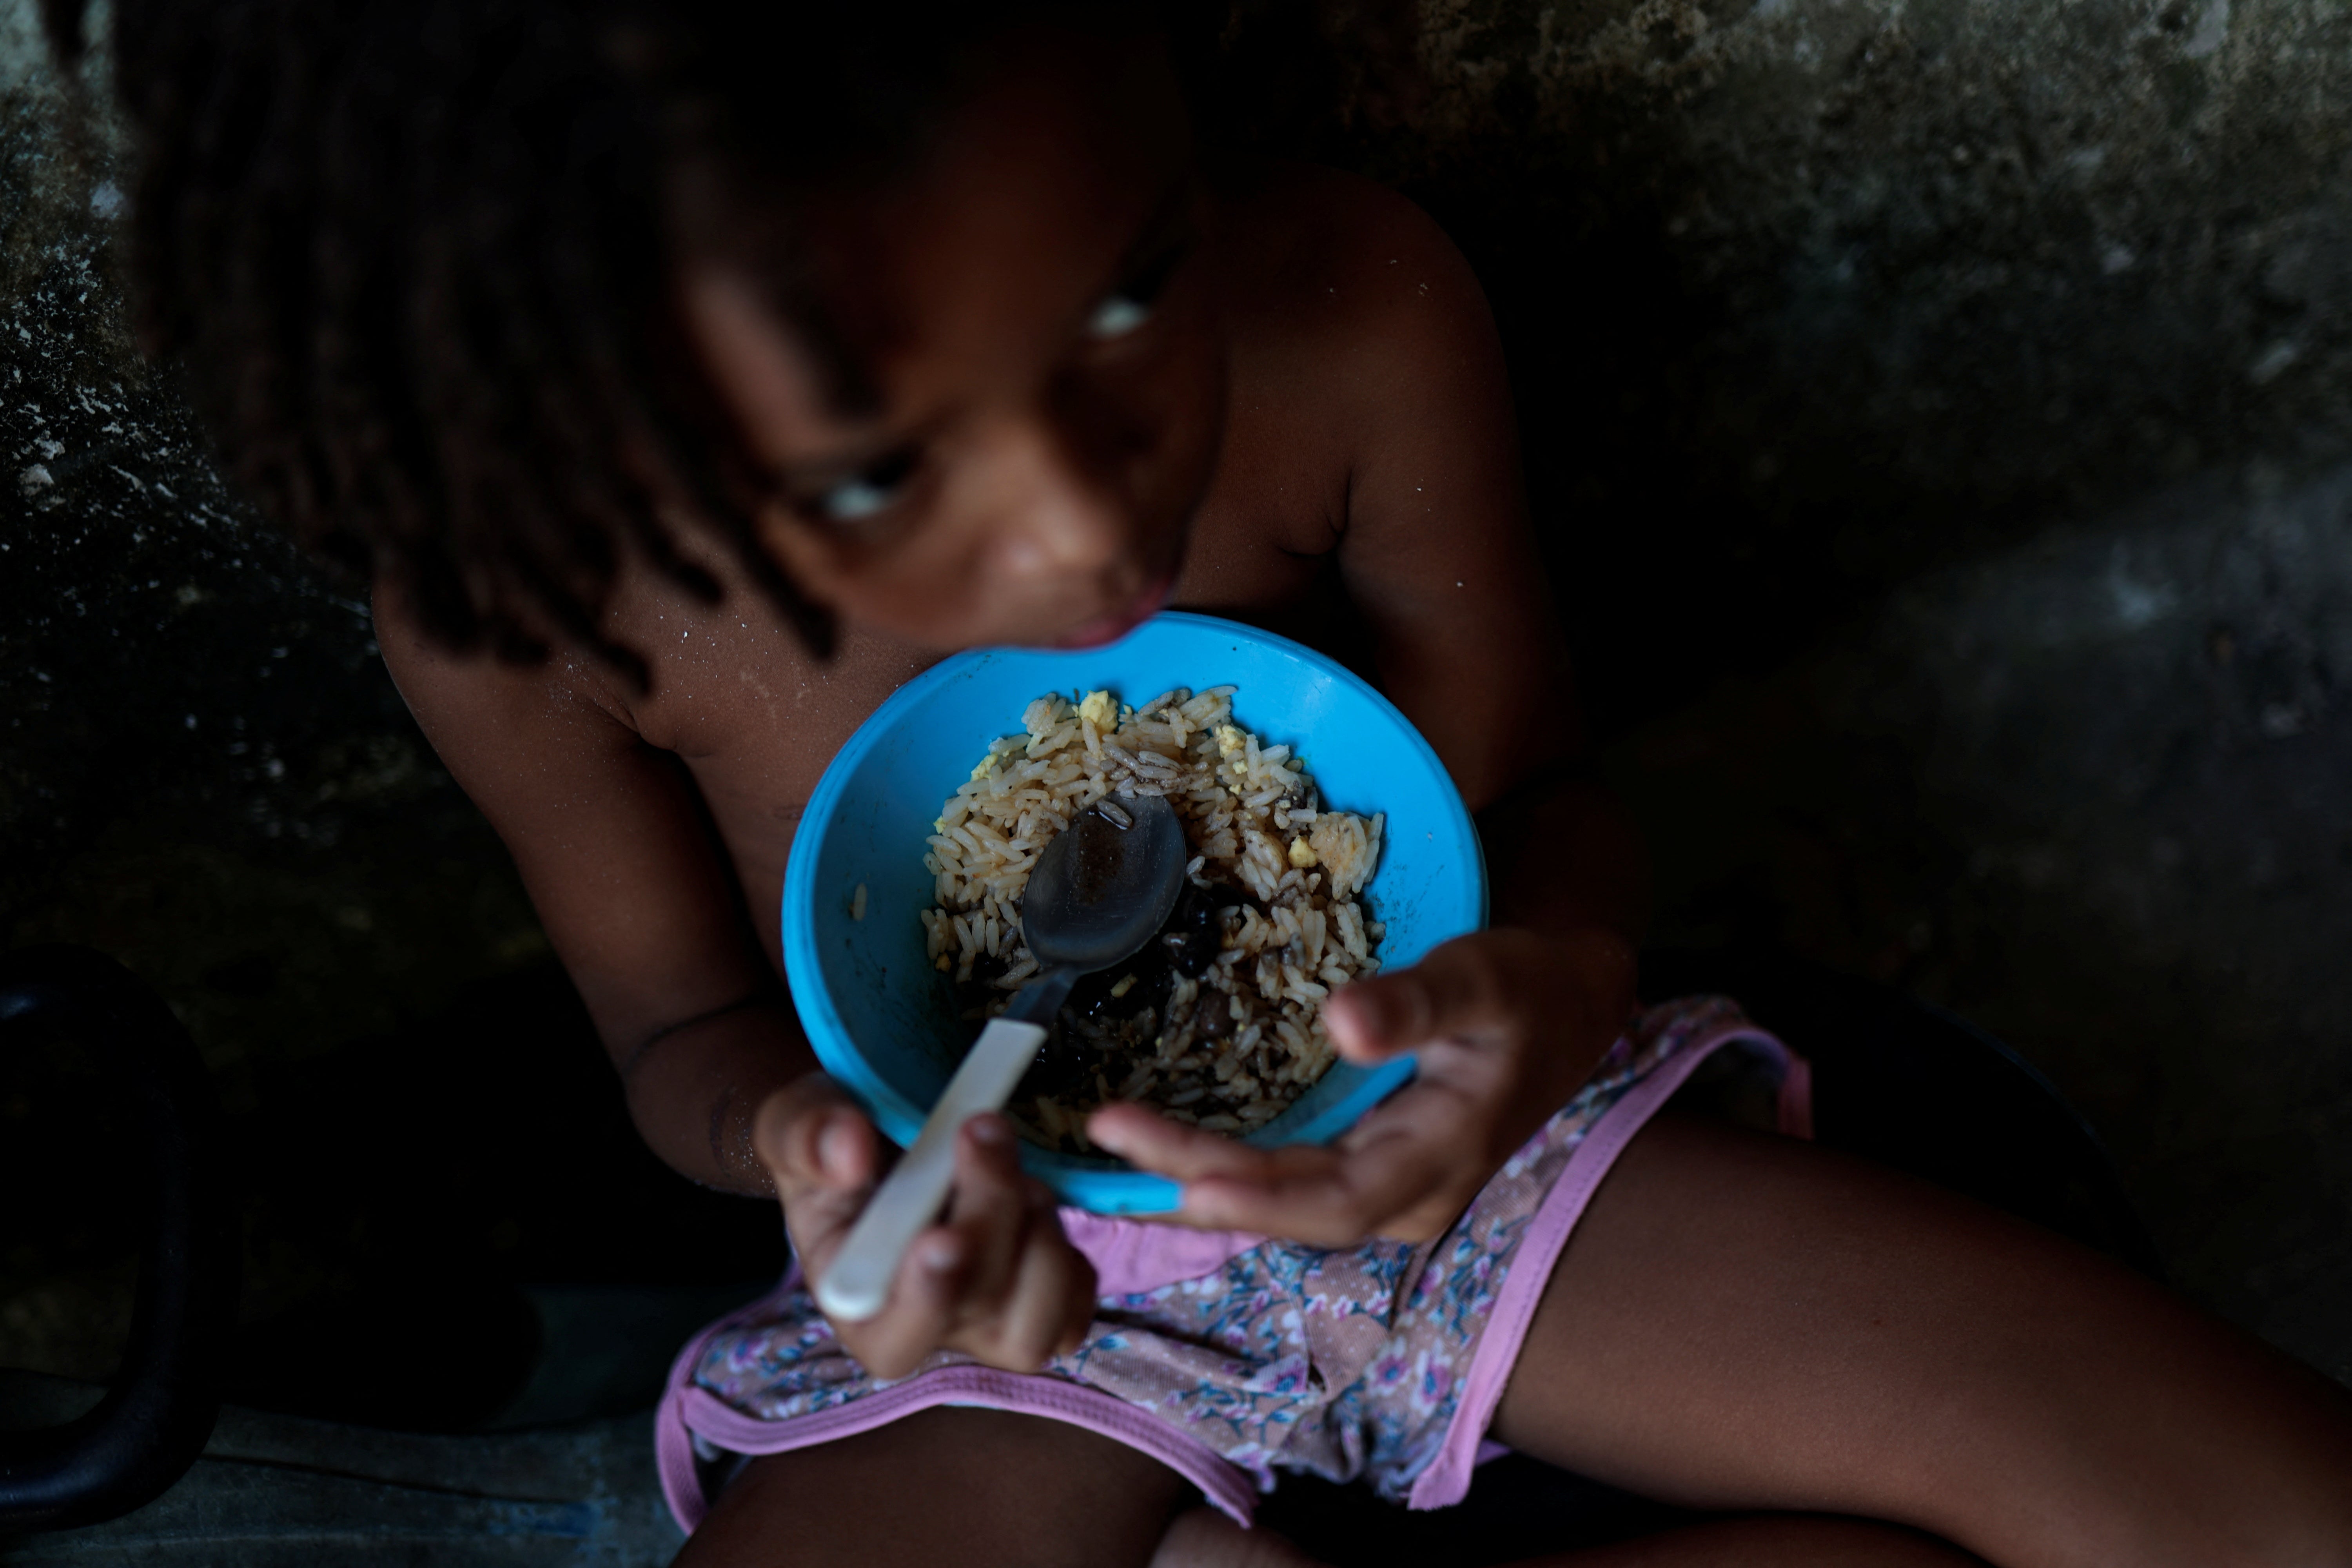 Thawanny eats a lunch of rice, beans and egg in her family's house, in the Arco Iris favela